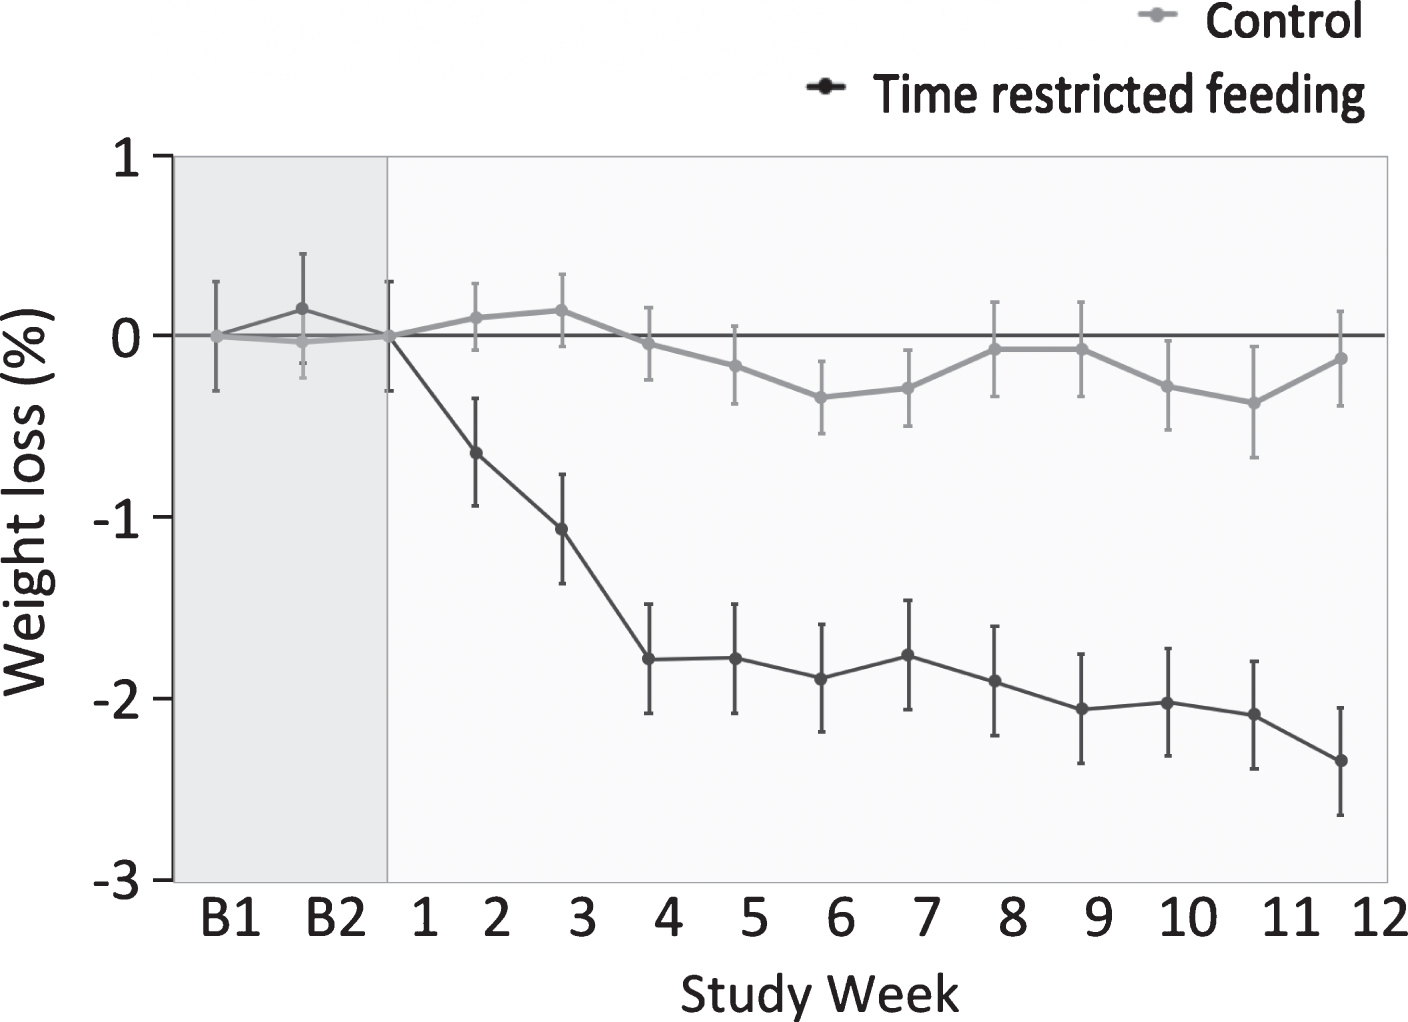 Weight loss by the time restricted feeding group versus controls 1. 1All values reported as mean ± SEM. Data were included for 46 participants; means were estimated using an intention-to-treat analysis using last observation carried forward. Body weight remained stable during the 2-week baseline period (week B1 and week B2). Body weight decreased in the time restricted feeding group relative to controls during the 12-week intervention period (P < 0.001 for time × group interaction).